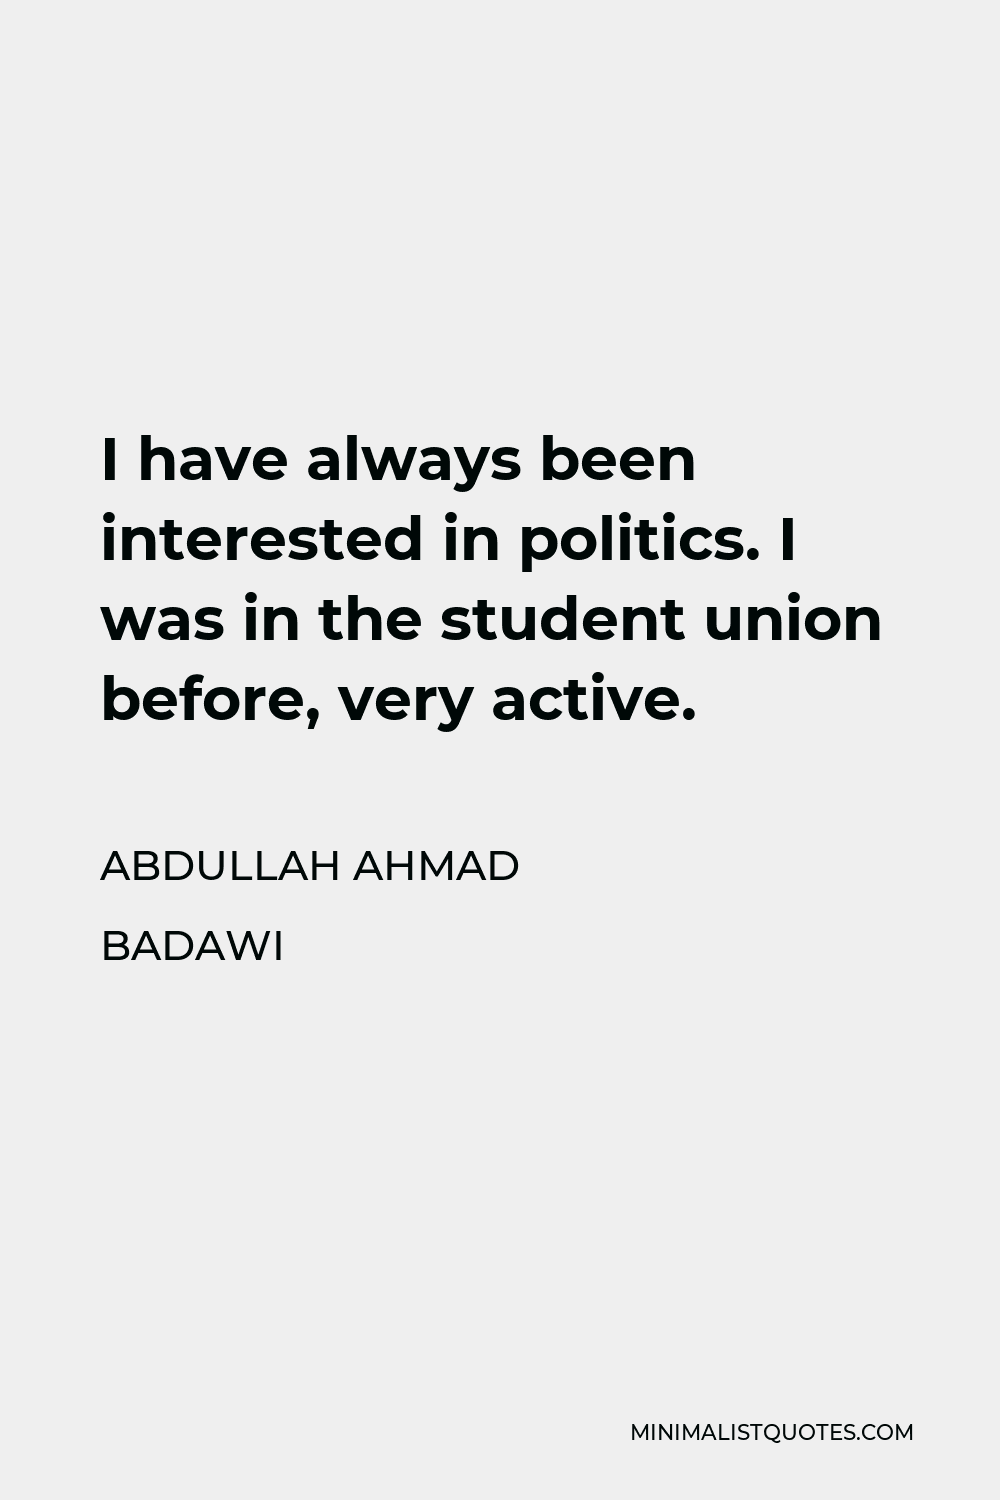 Abdullah Ahmad Badawi Quote - I have always been interested in politics. I was in the student union before, very active.